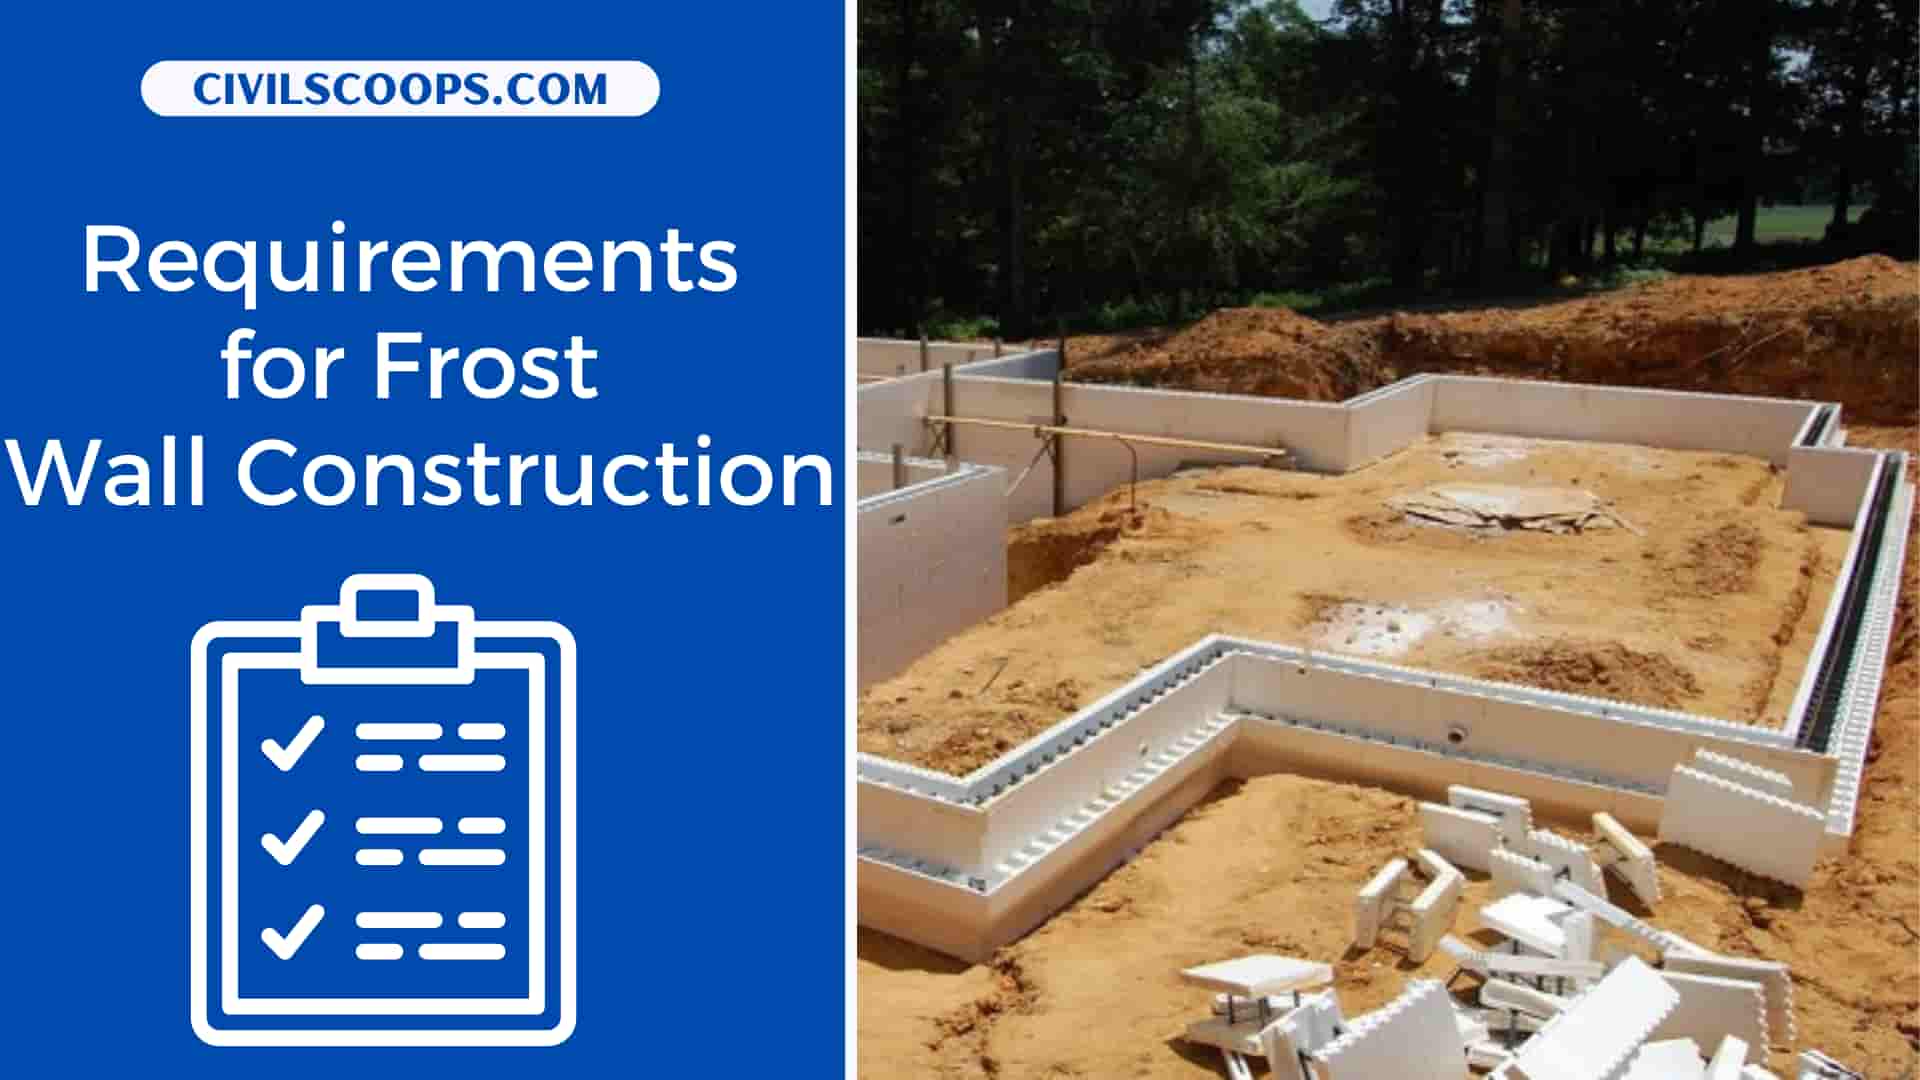 Requirements for Frost Wall Construction